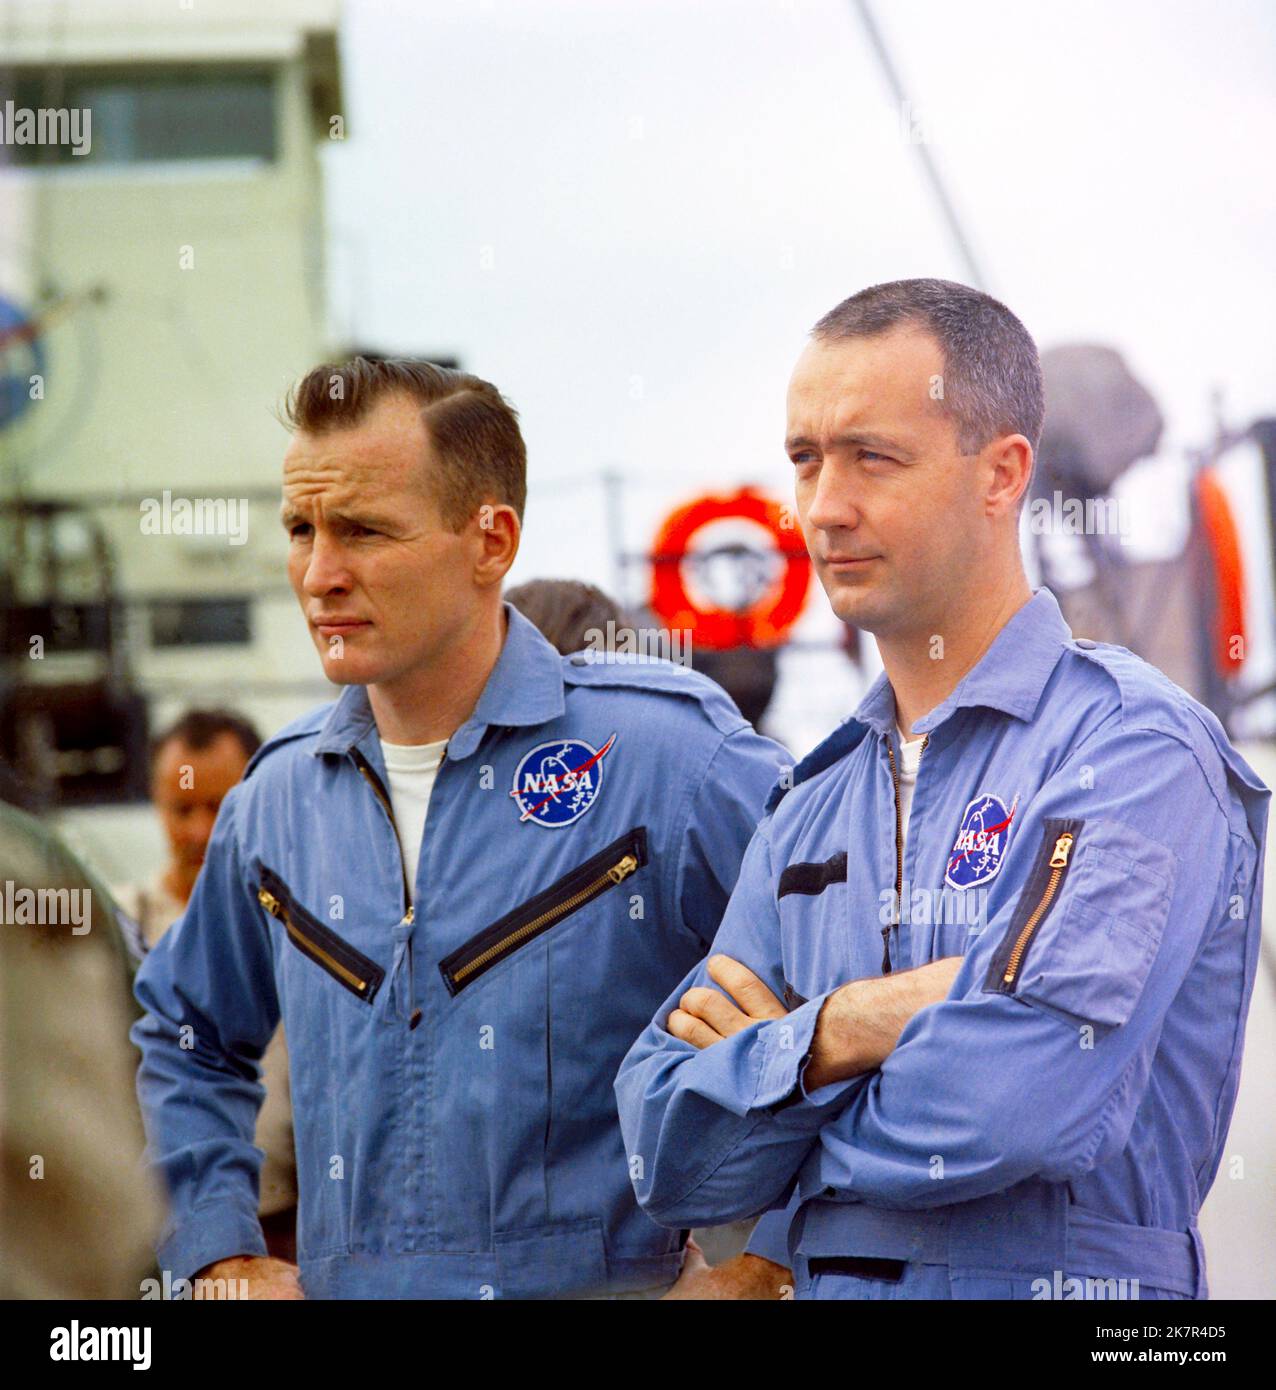 Houston, United States. 18th Oct, 2022. NASA Gemini-Titan 4 prime crew, astronauts Edward H. White II (left), pilot, and James A. McDivitt, command pilot, aboard the NASA Motor Vessel Retriever during training in the Gulf of Mexico, May 5, 1965 off the coast of Texas. McDivitt commanded the first spacewalk mission and took part in the first crewed orbital flight of a the lunar module, during Apollo 9, died October 15, 2022 at age 93. Credit: NASA/NASA/Alamy Live News Stock Photo